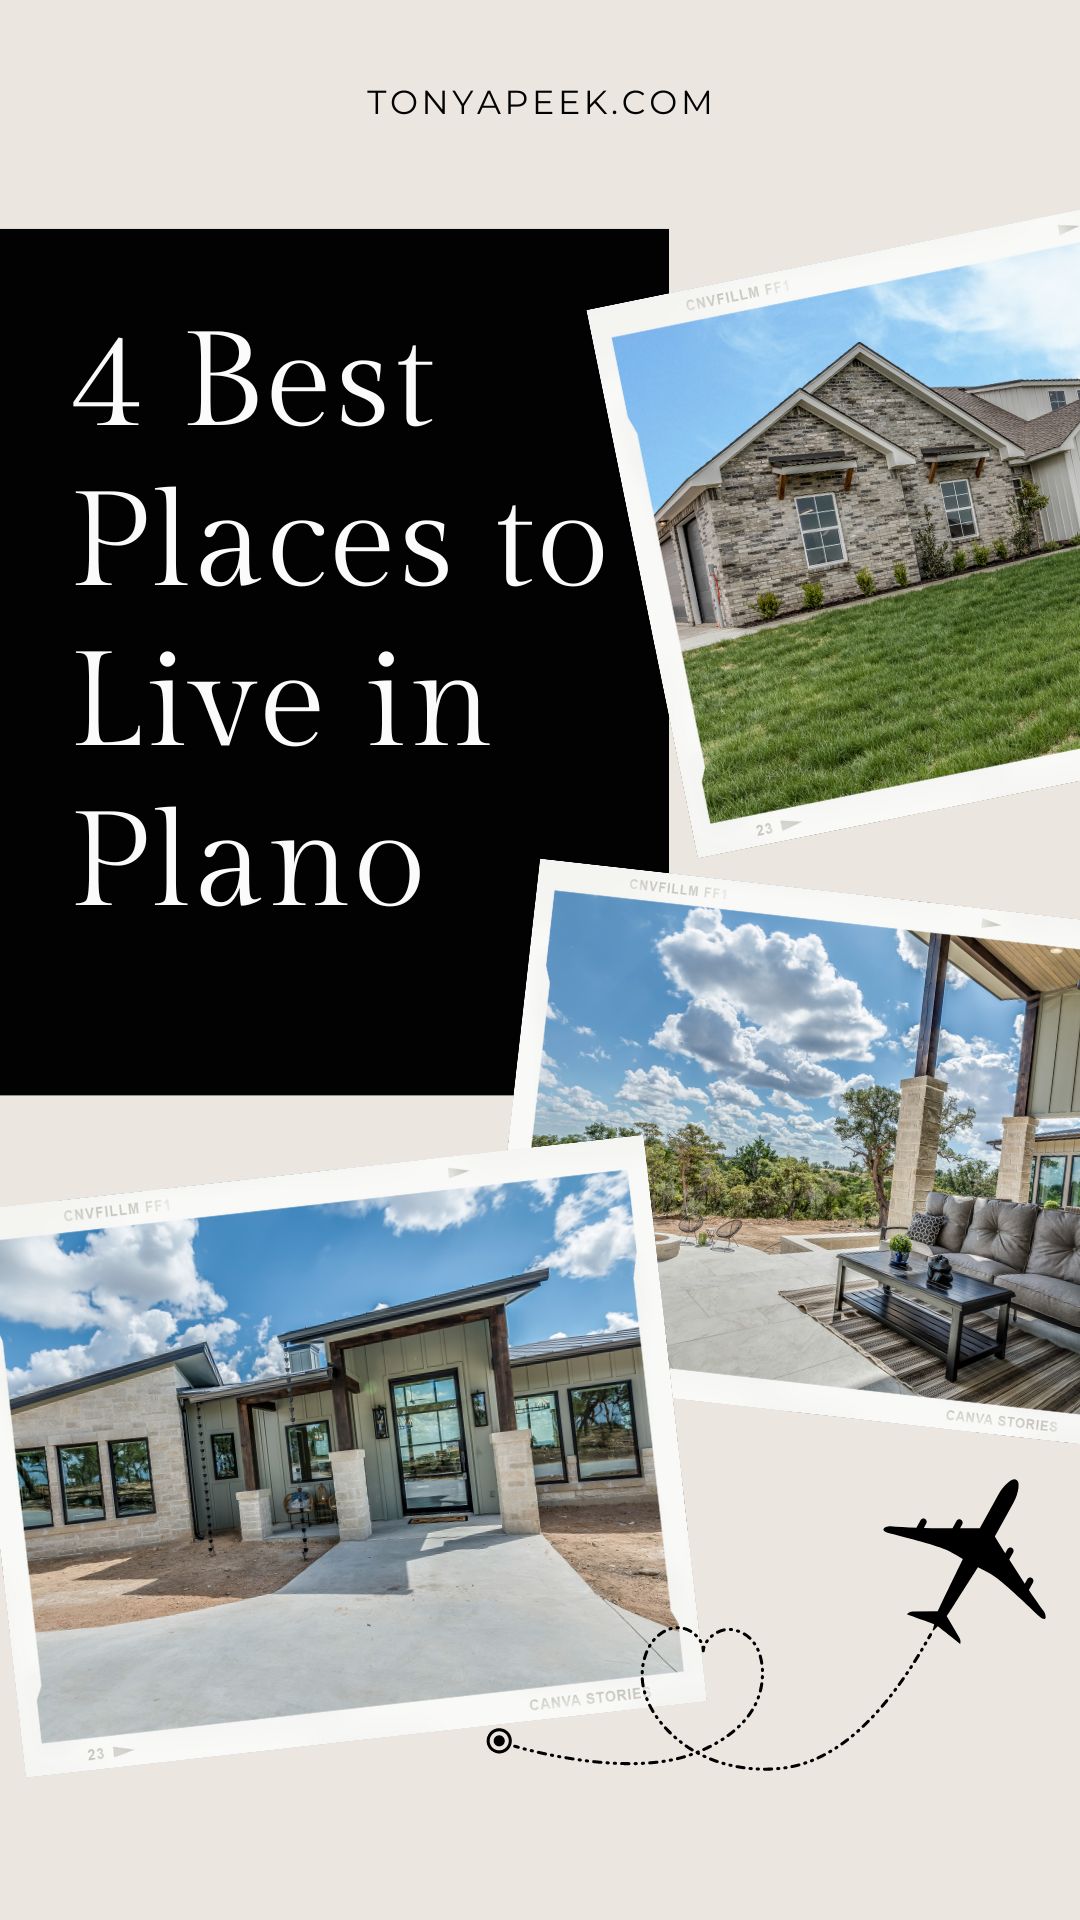 4 Best Places to Live in Plano